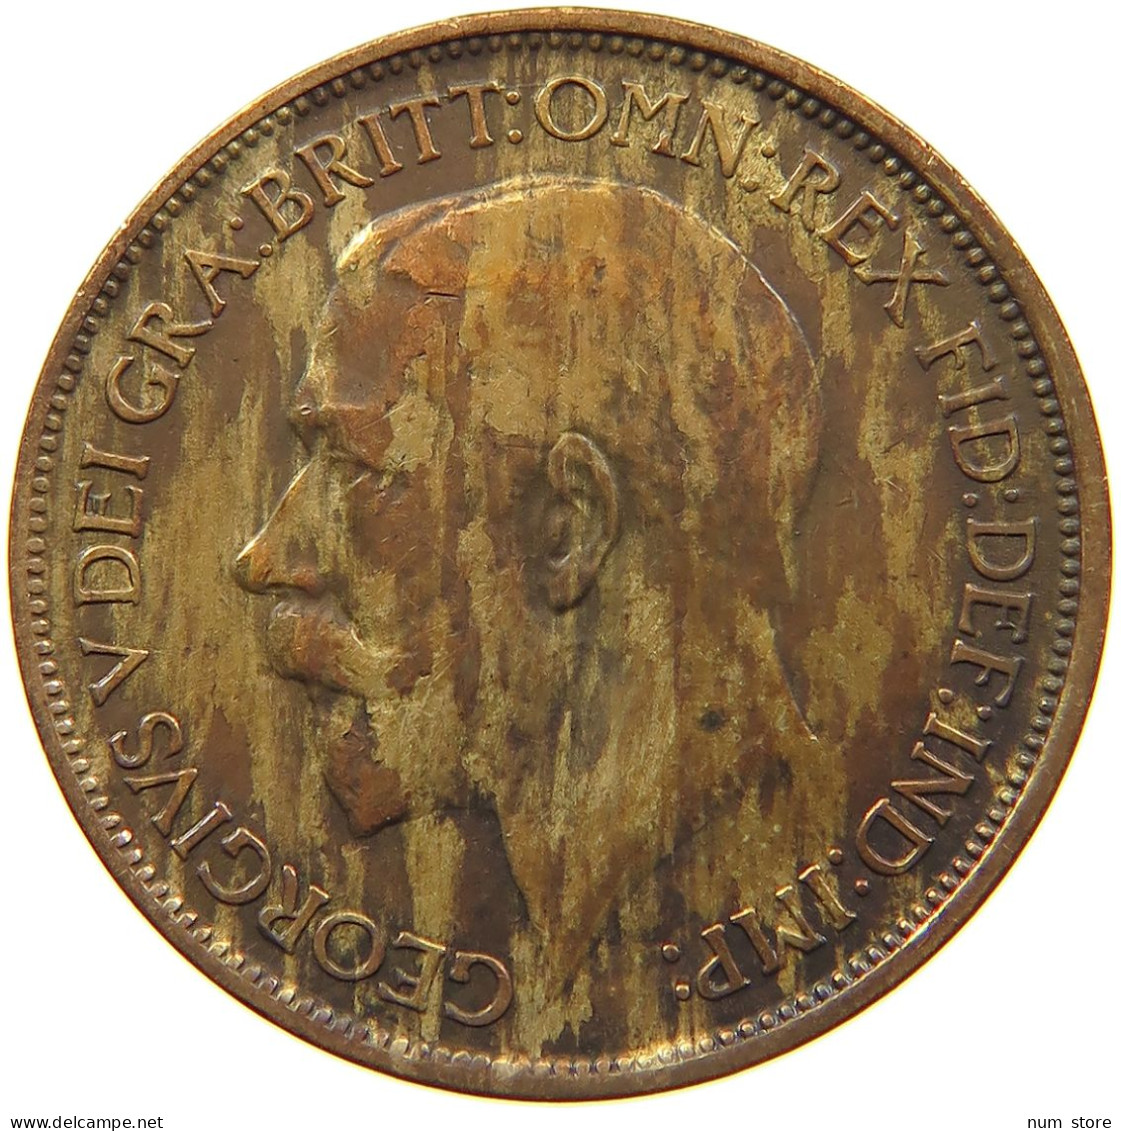 GREAT BRITAIN 1/2 PENNY 1921 GEORGE V. (1910-1936) #MA 101862 - C. 1/2 Penny